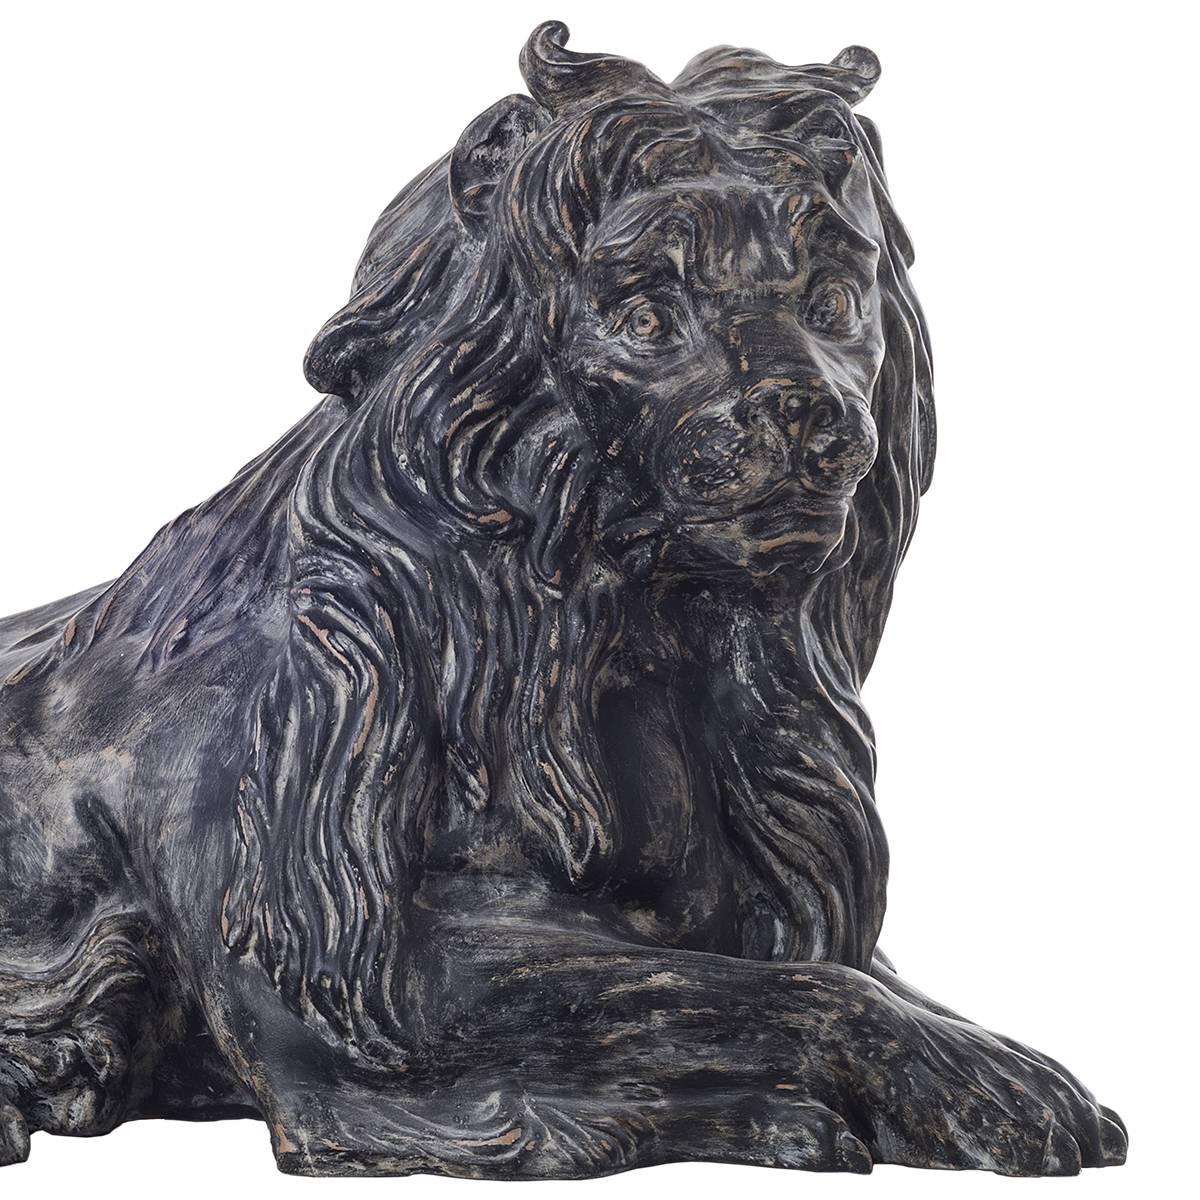 Italian Ceramic Reproduction of Lying Down Lion For Sale